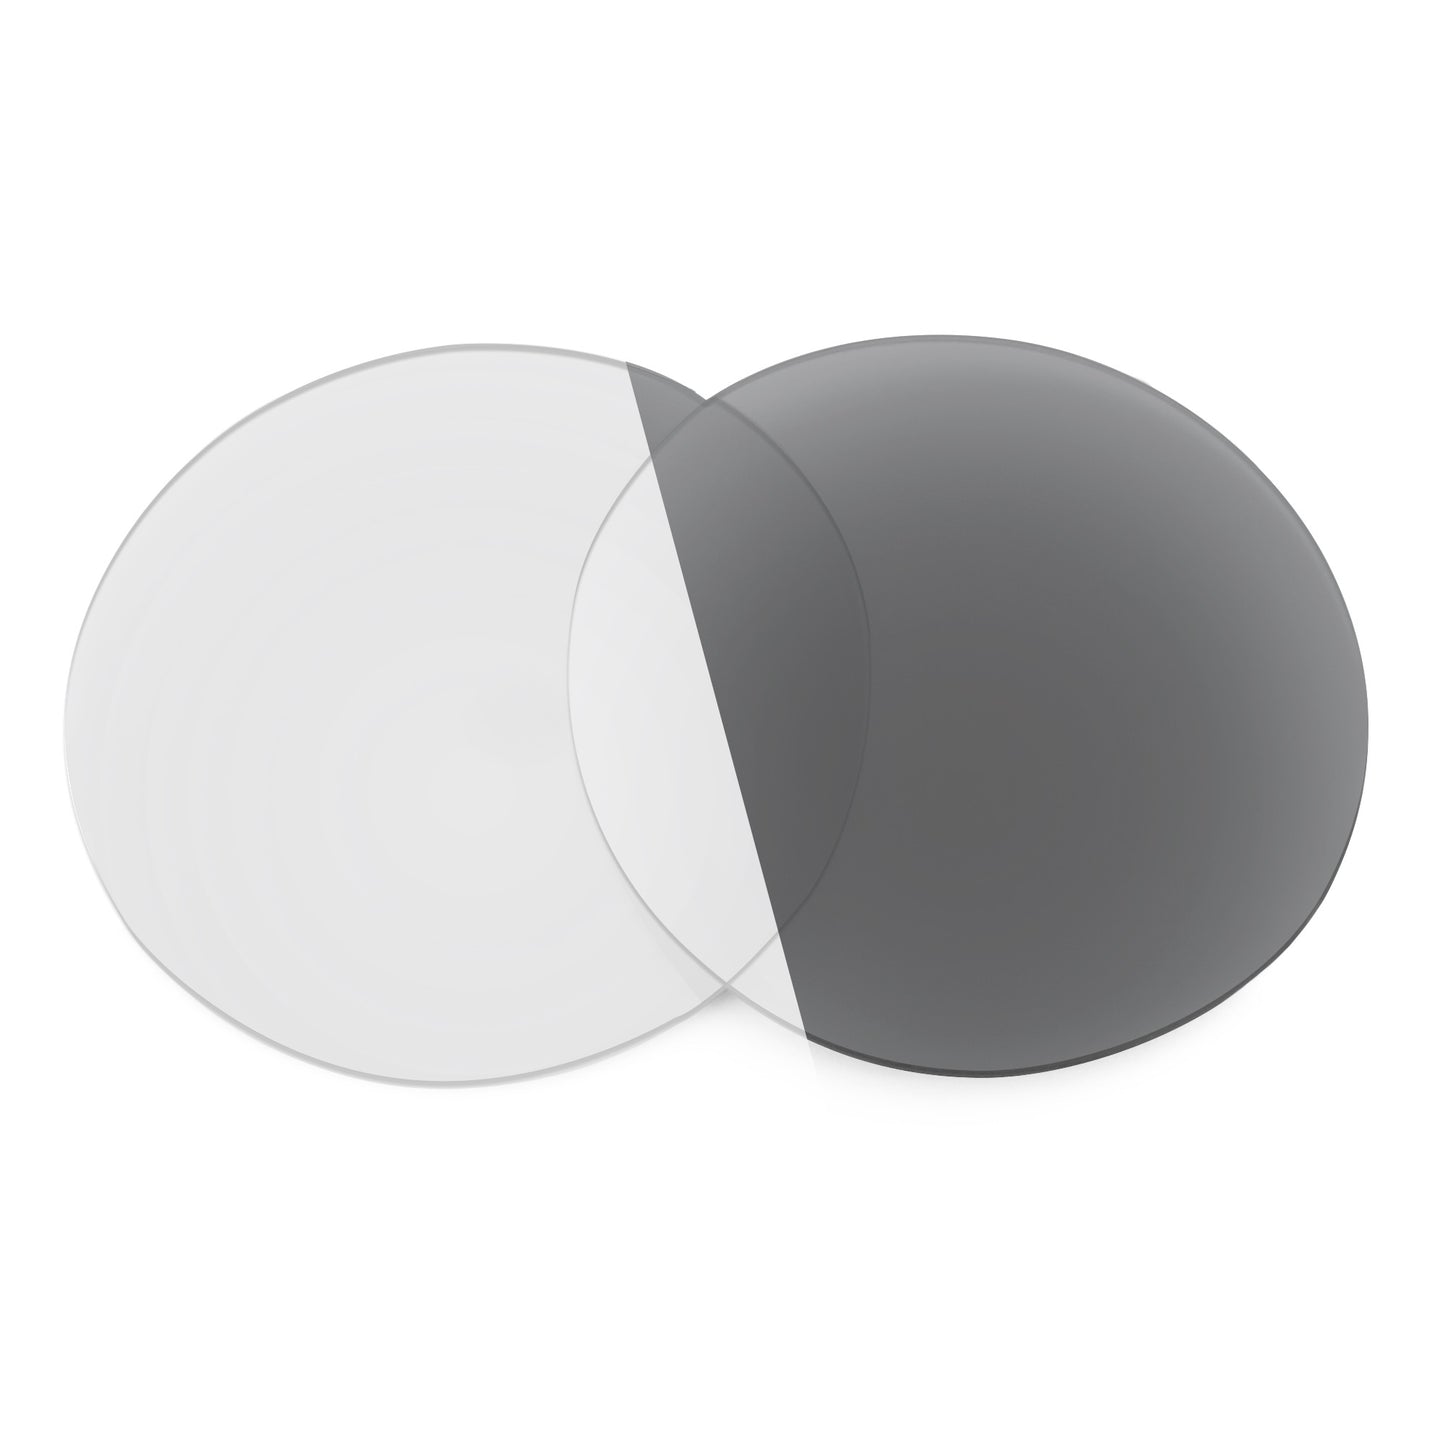 Revant replacement lenses for Ray-Ban Erika Metal RB3539 54mm Non-Polarized Adapt Gray Photochromic